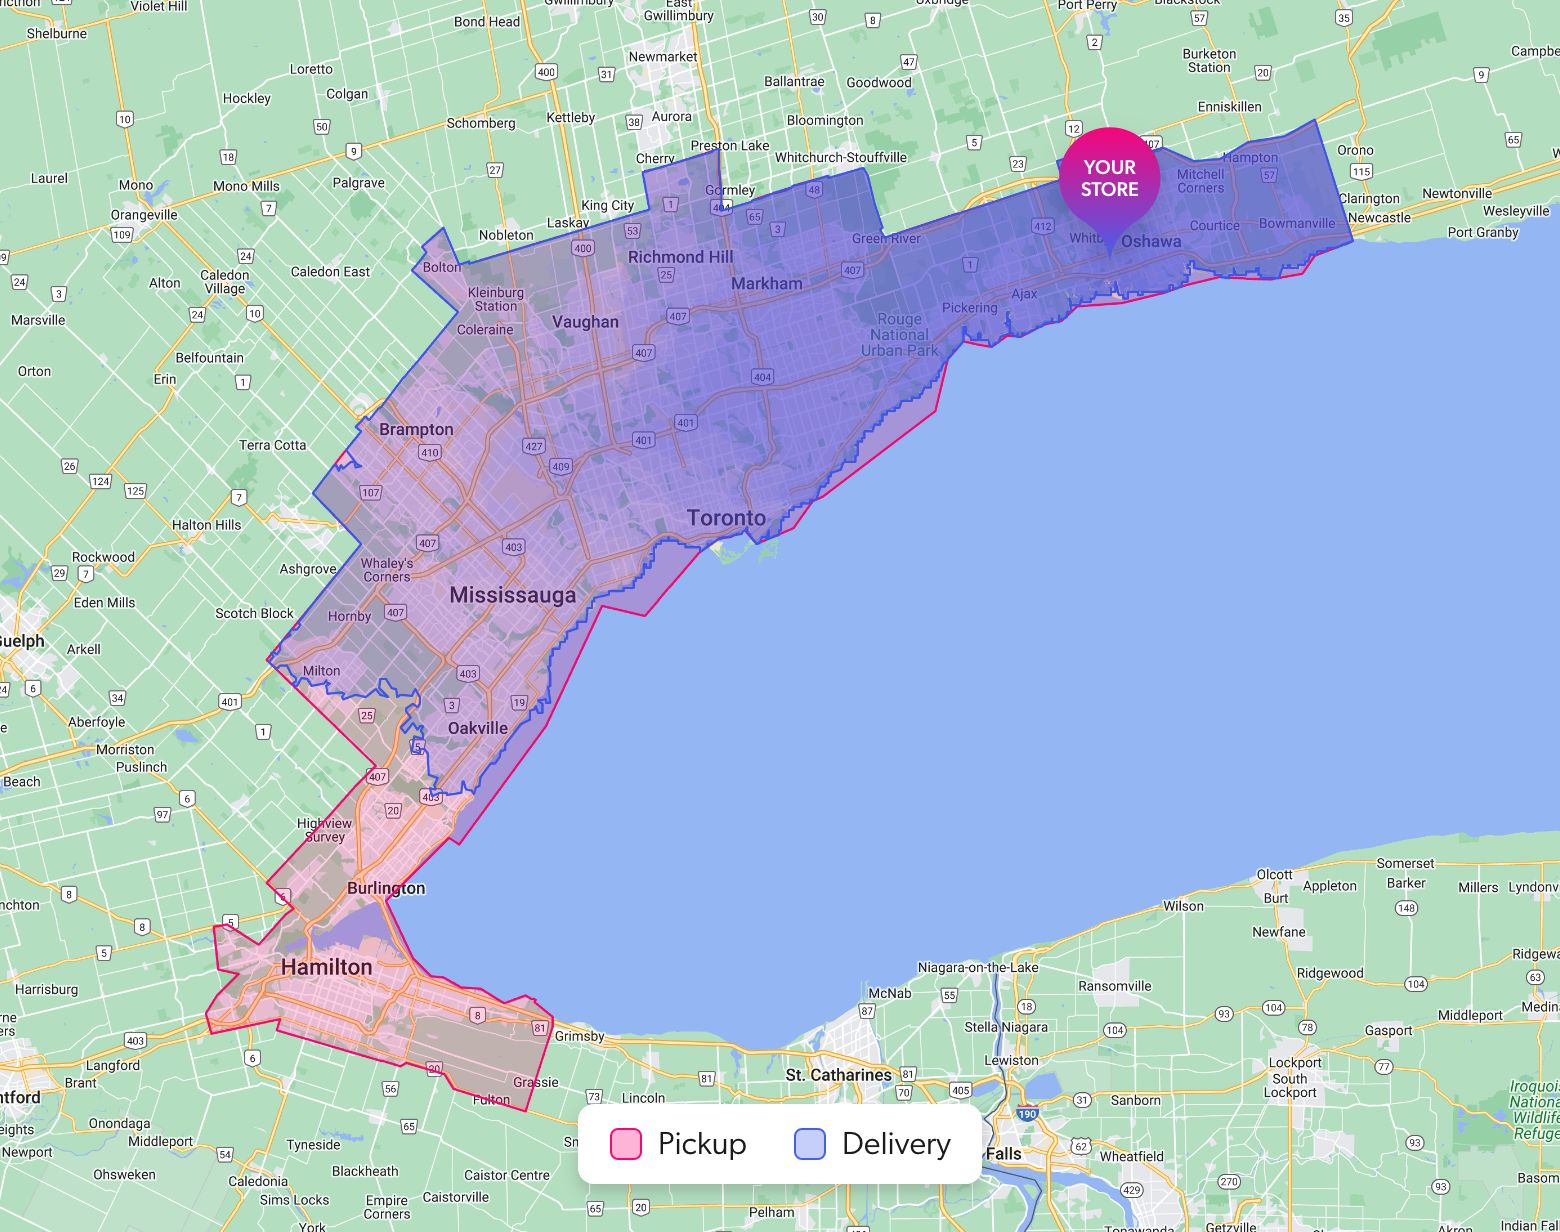 Oshawa pickup and delivery zones